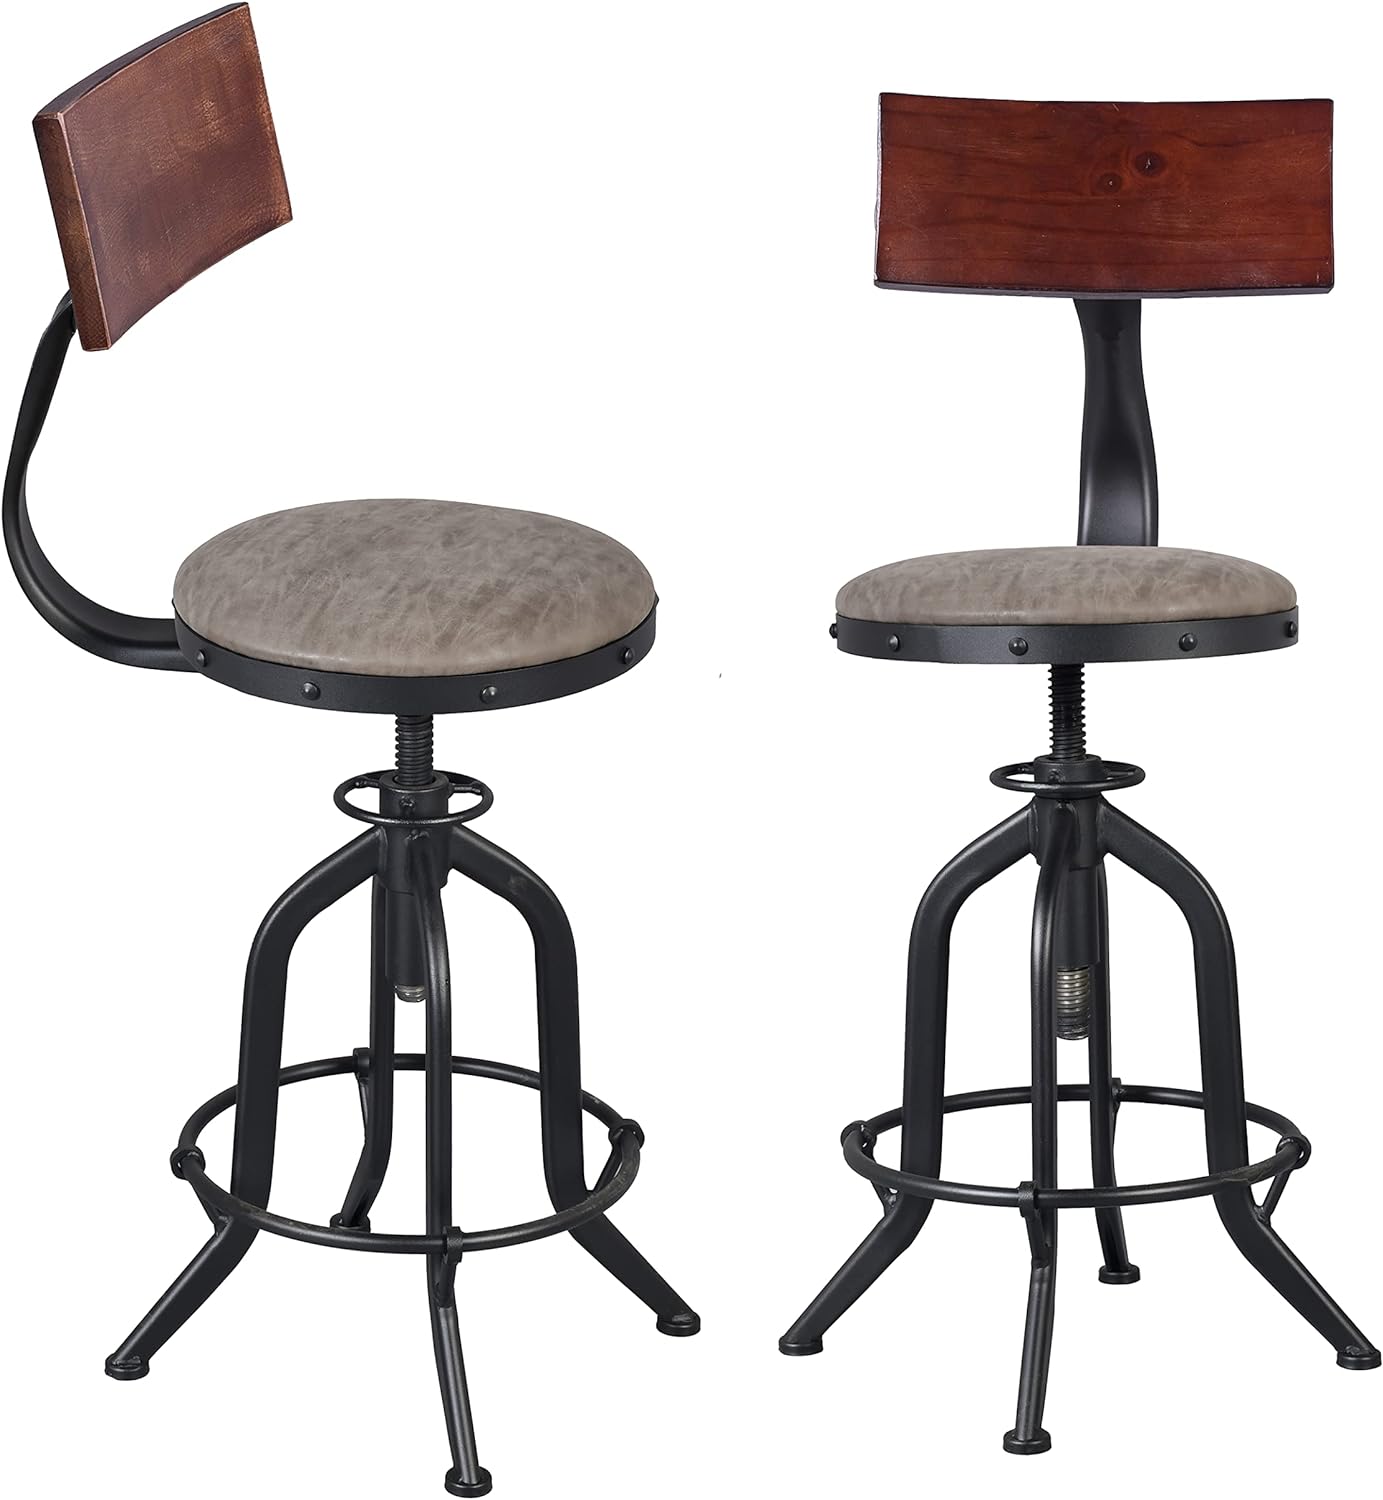 20.47-24.4 Inch Counter Height Stools with Iron Backs,Adjustable Bar Stools Black Metal Round PU Leather Seat,Rustic Industrial Kitchen Stools Farm Swivel Cafe Stool,Set of 2,Welded